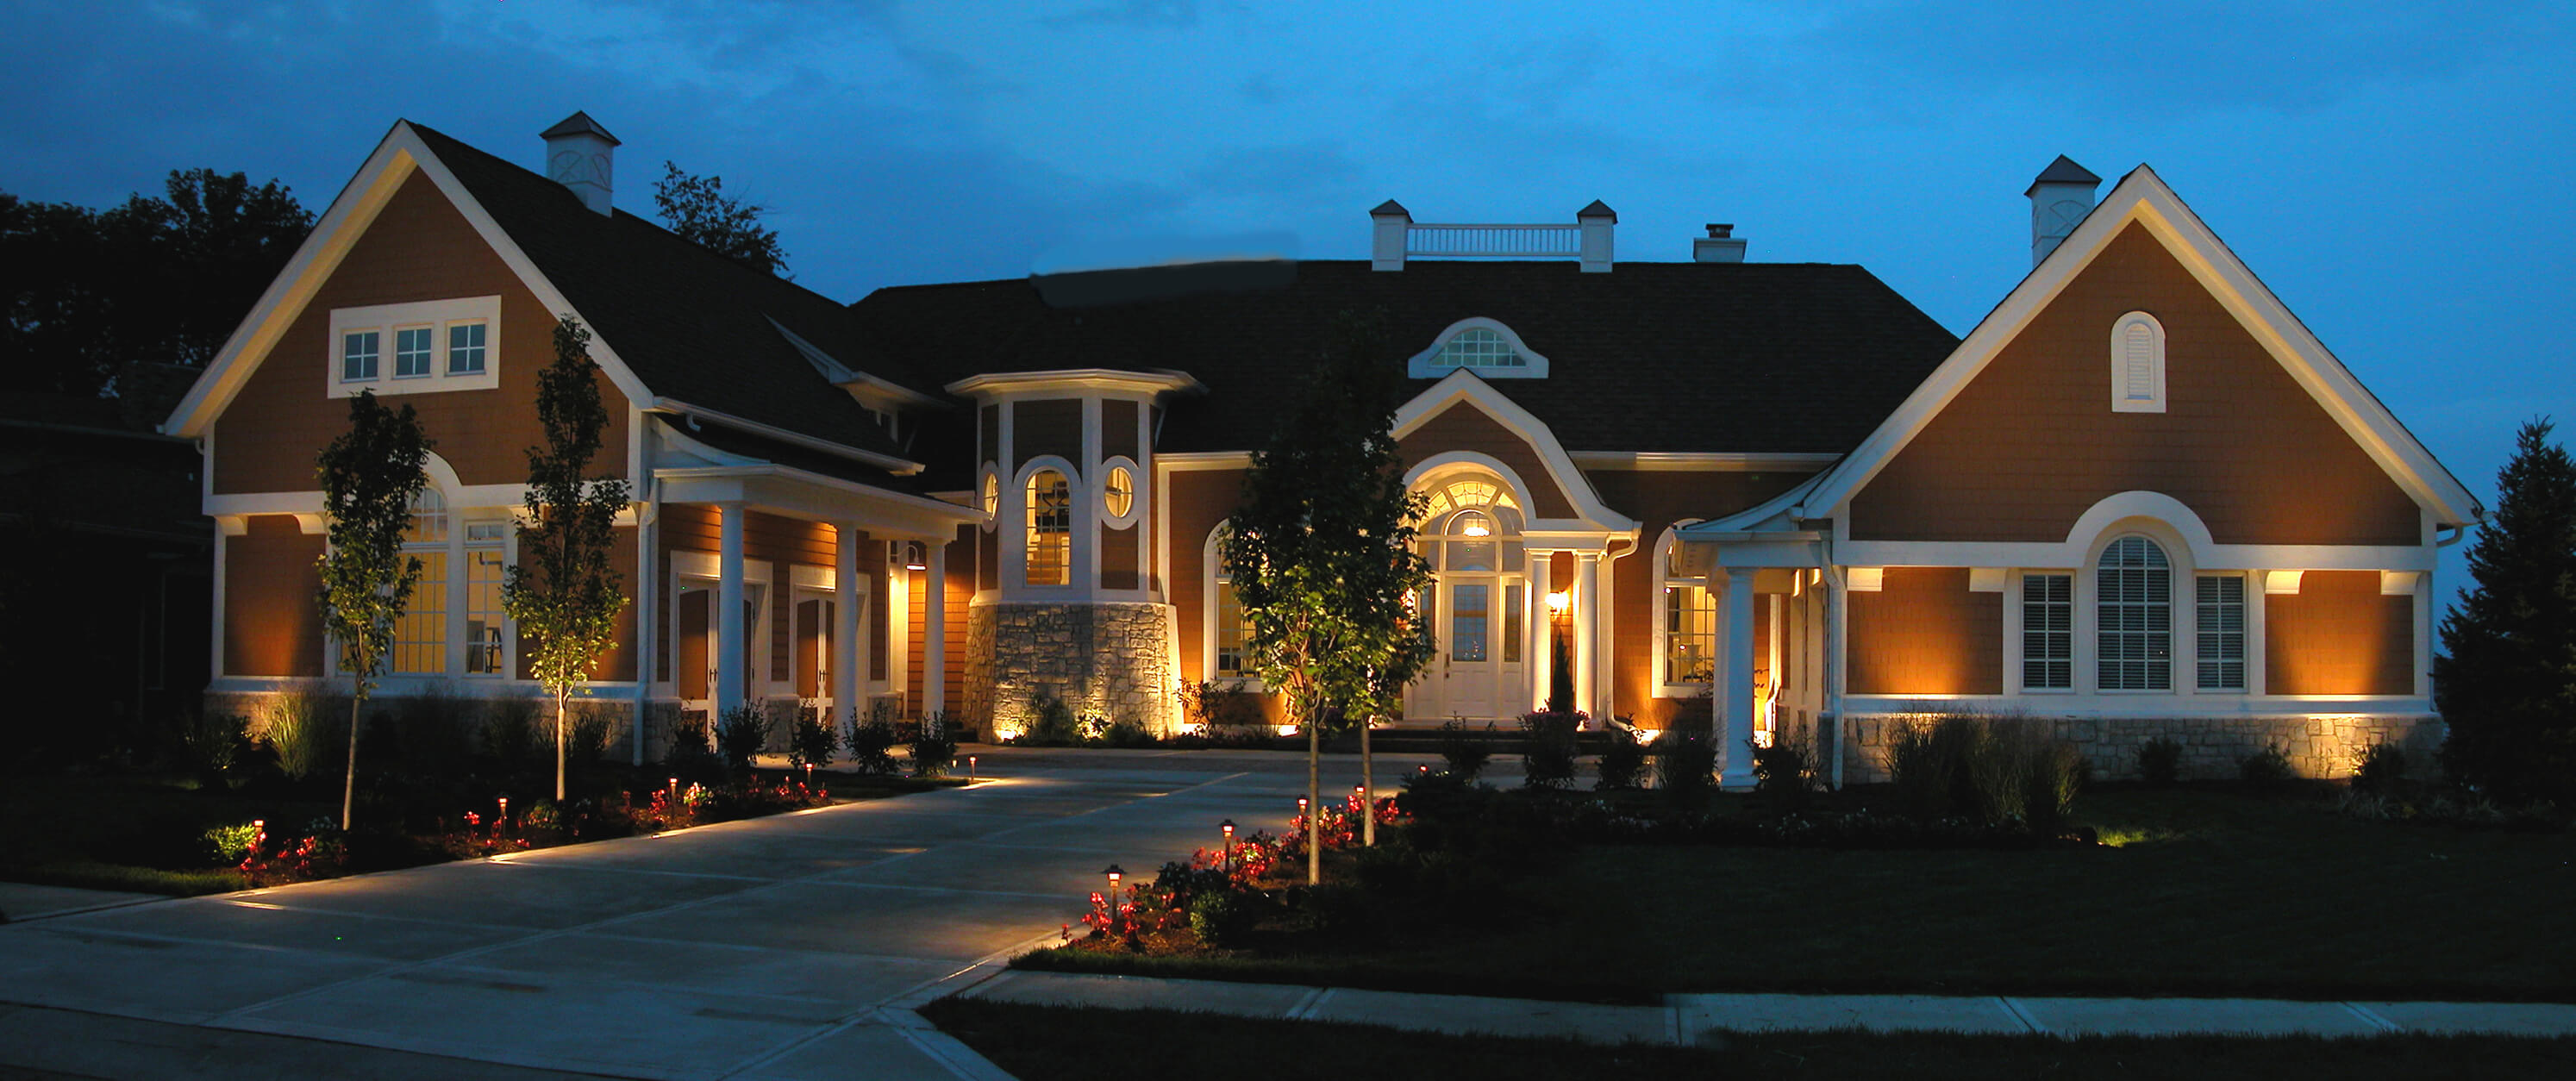 Well lit front of house and driveway 